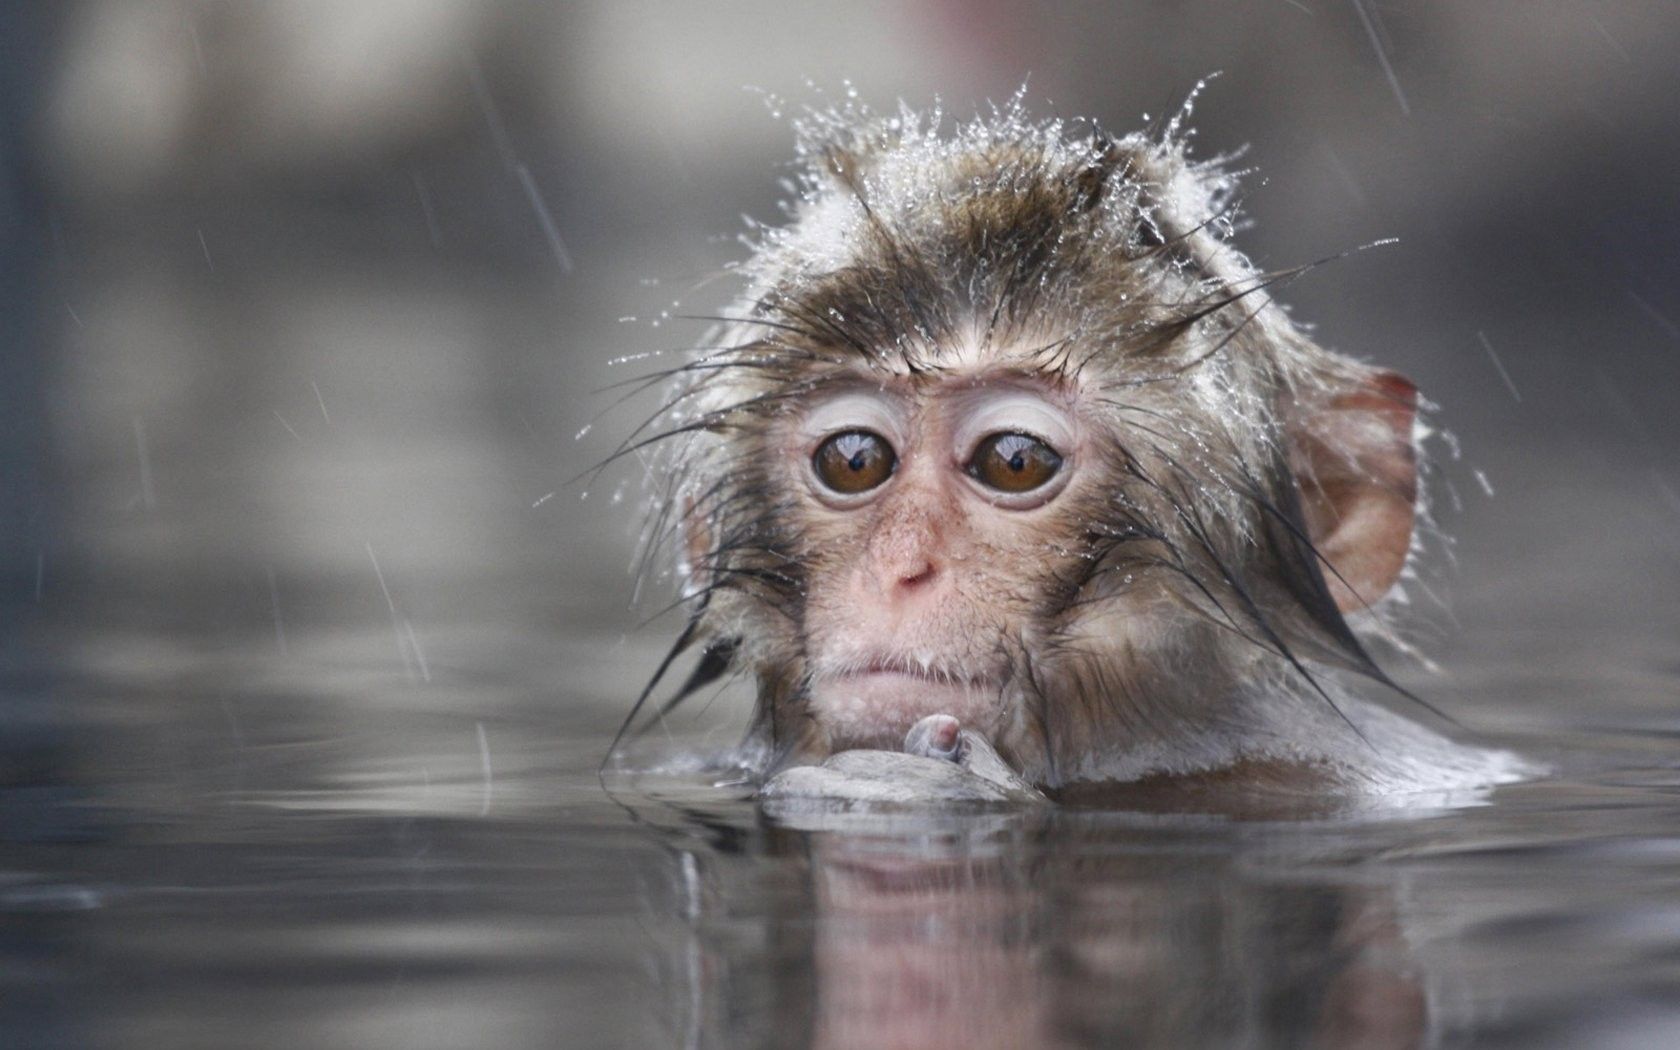 Animal Wallpaper, animals, Wet, Macaques Primates, Japanese